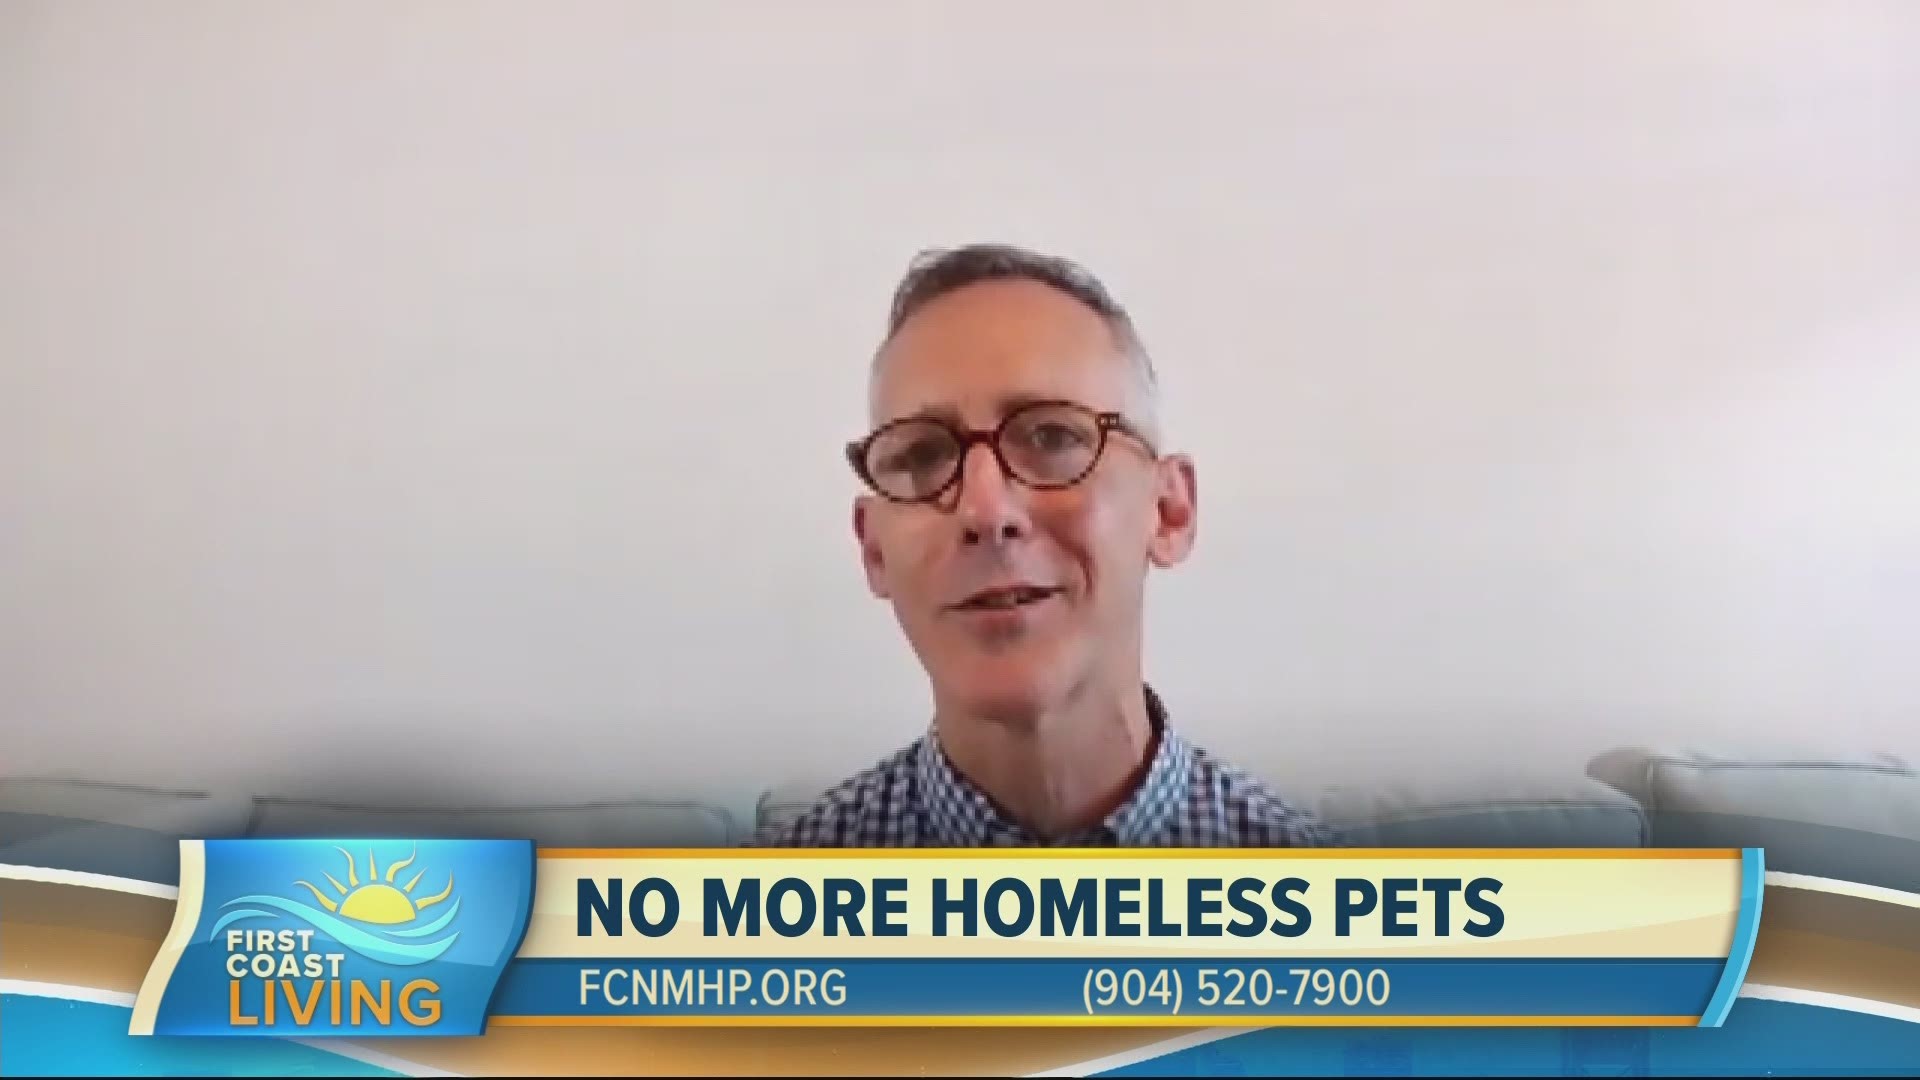 Learn about the 'FC No More Homeless Pets' mission and how you can help.